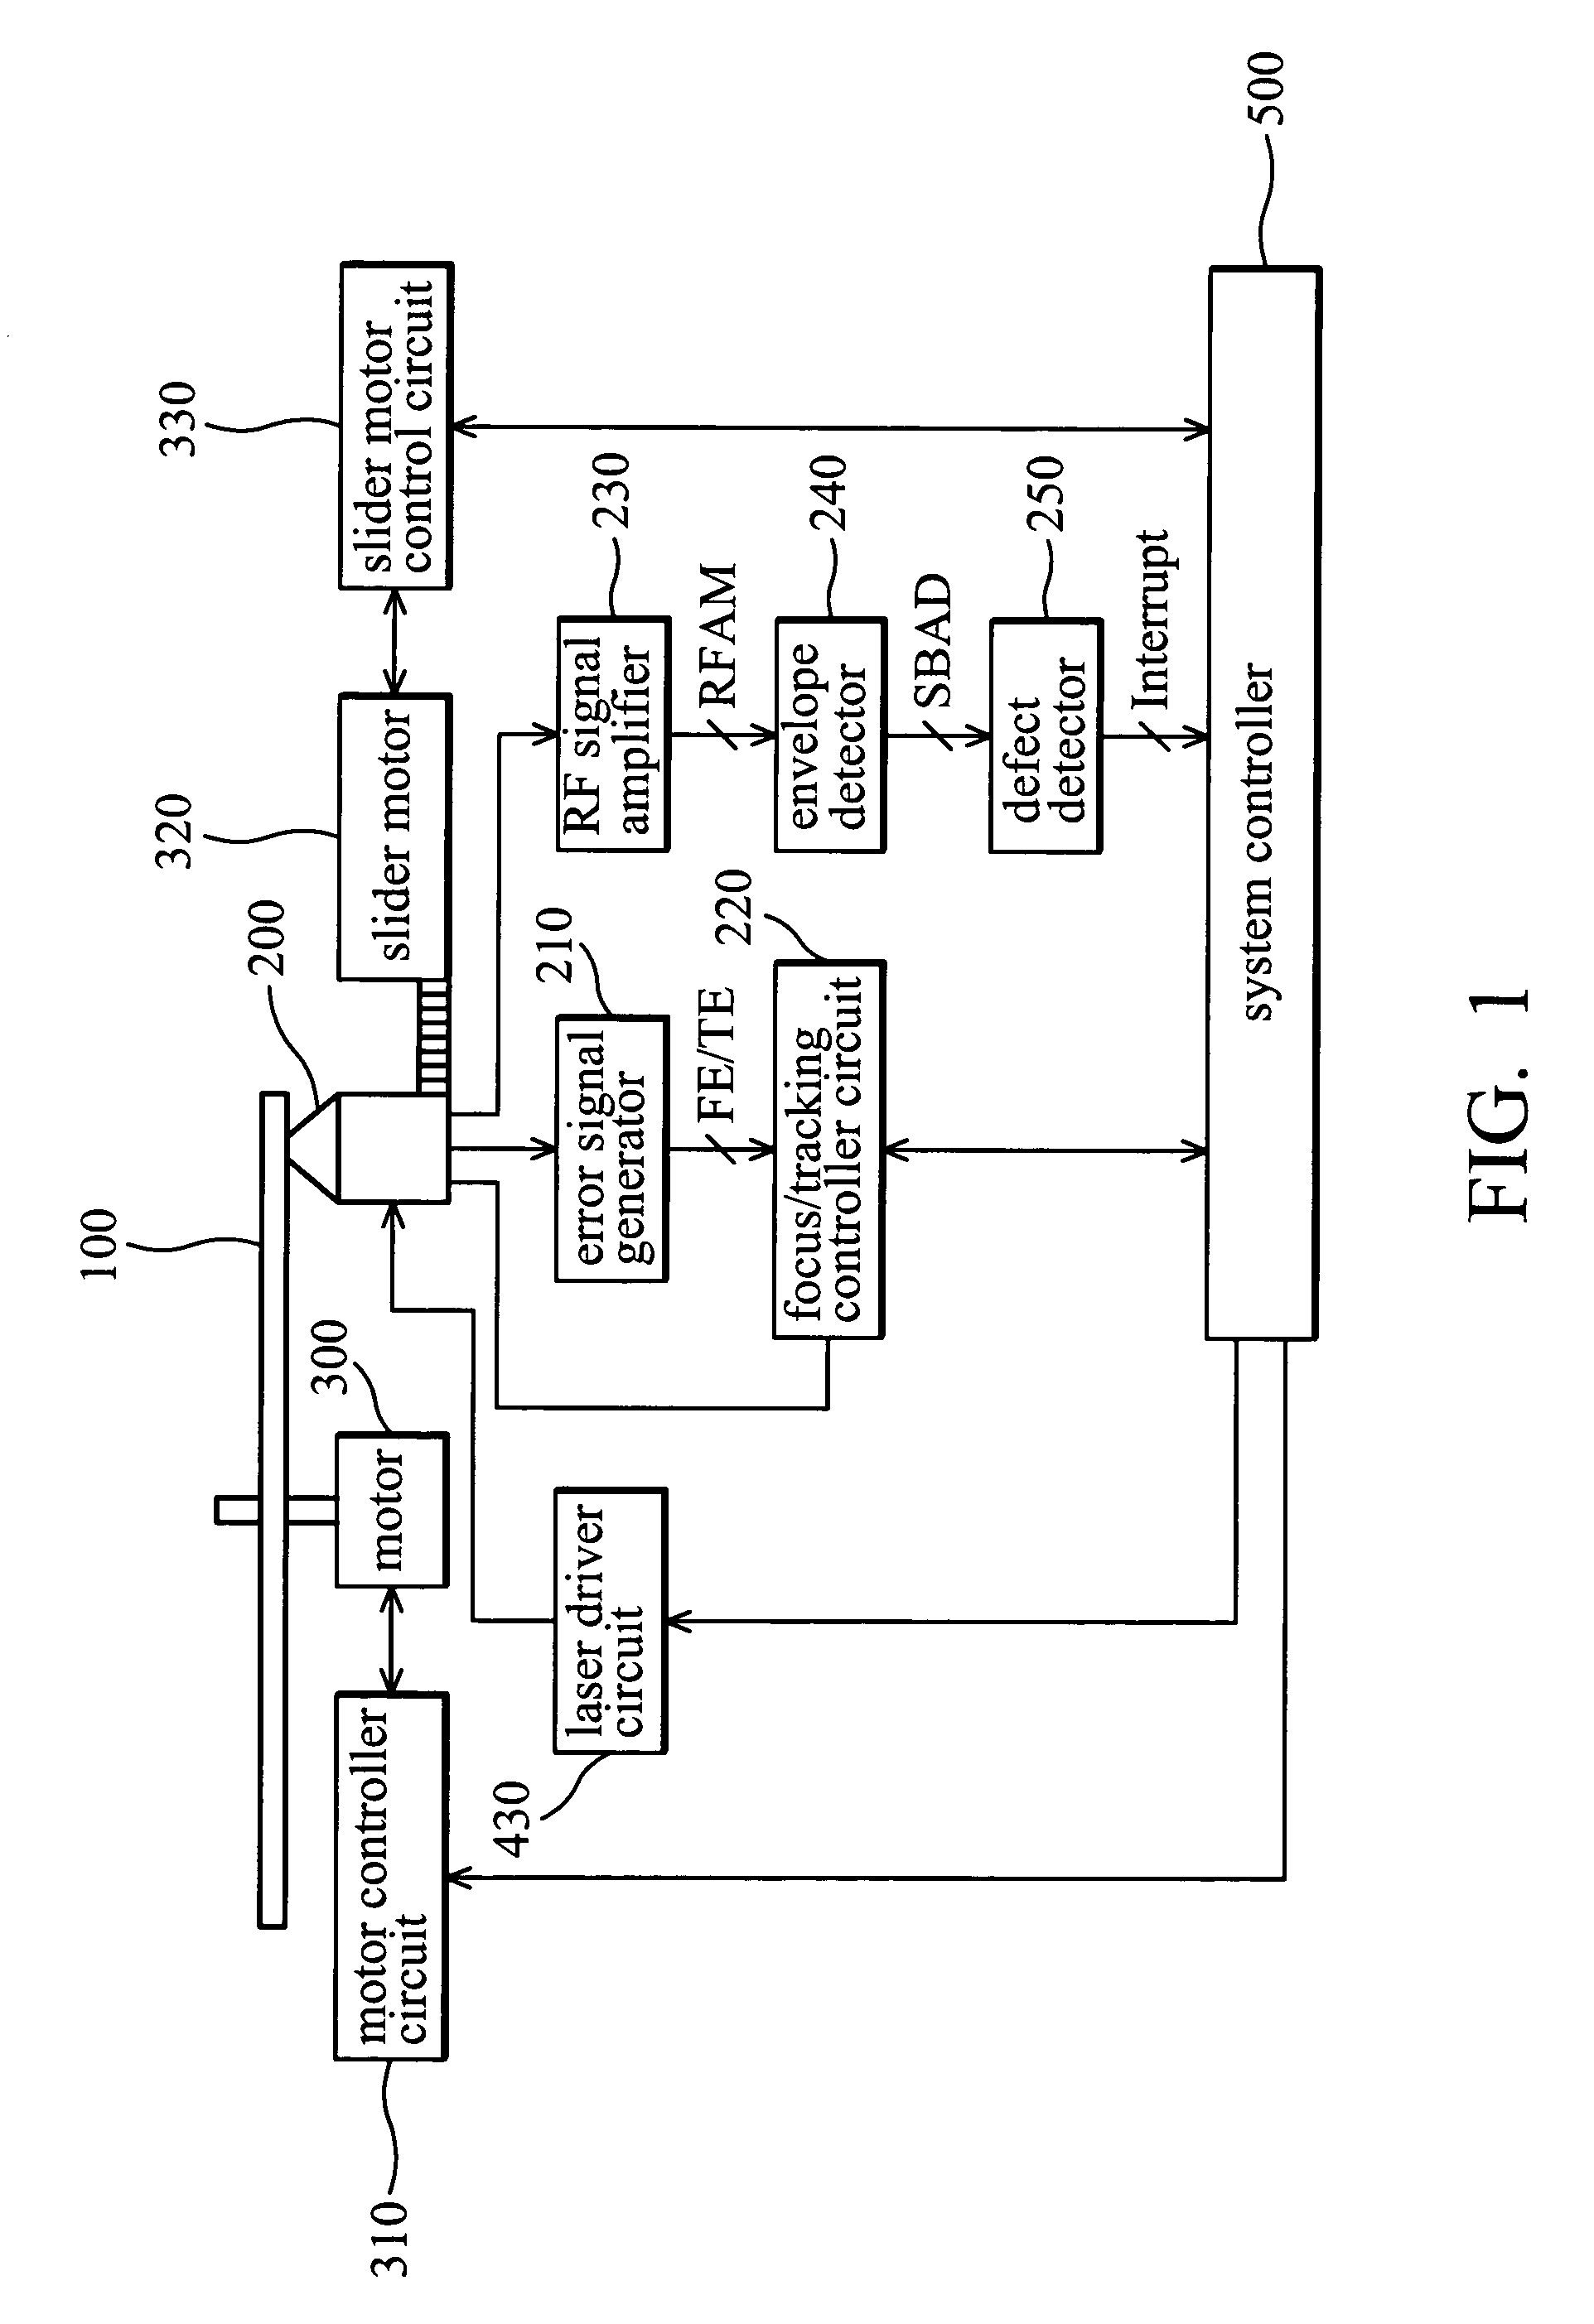 Method and apparatus for retry calculation in an optical disk device